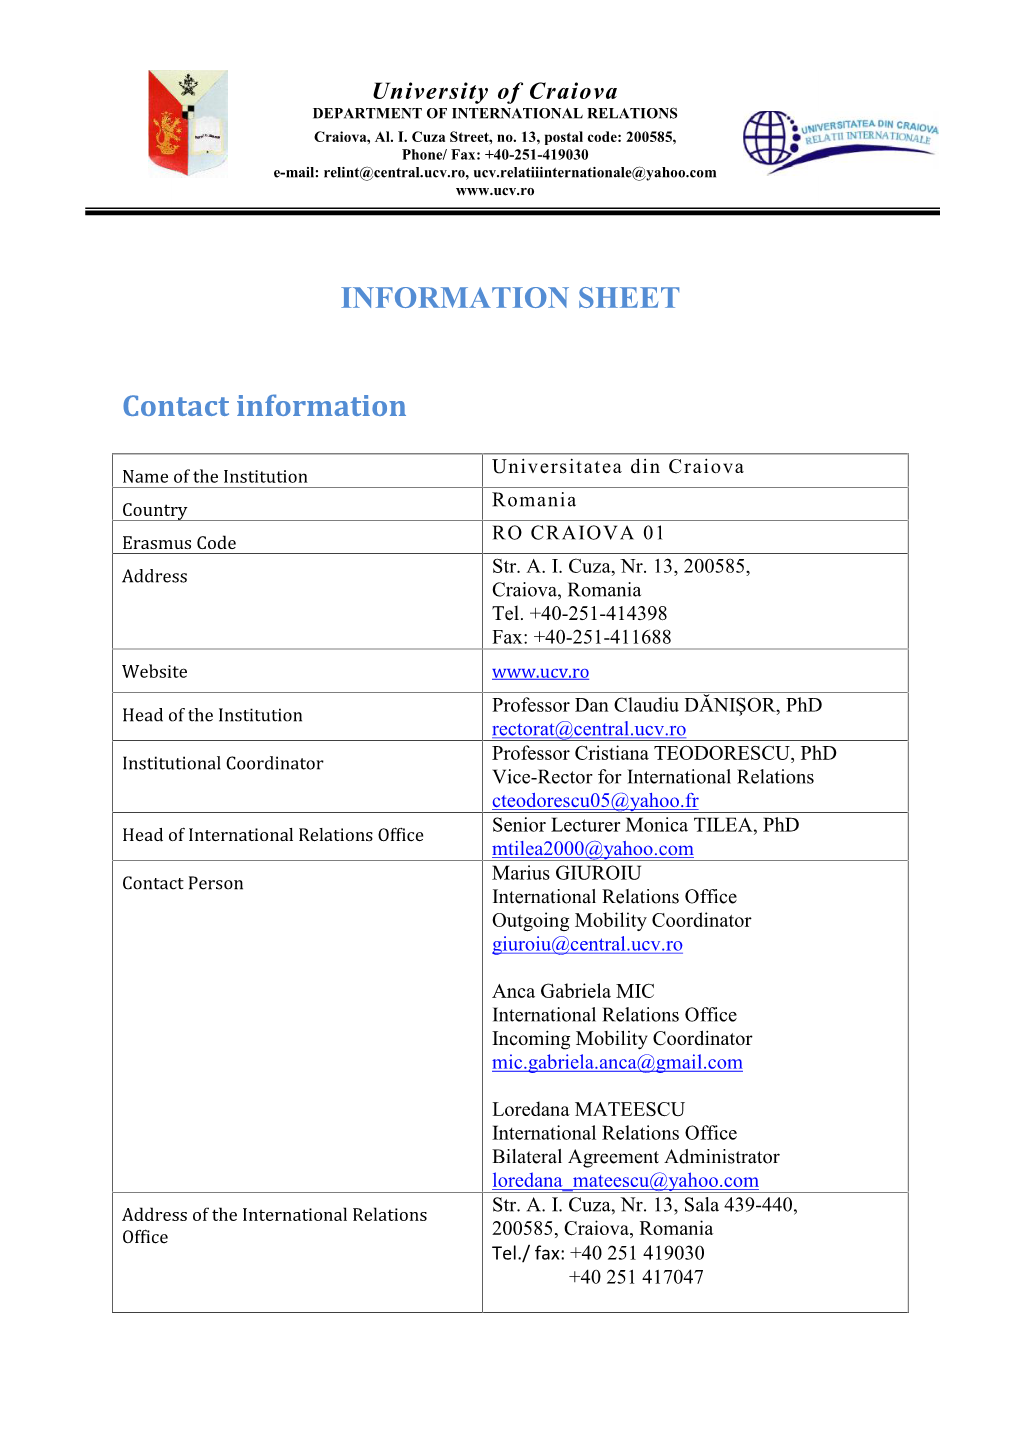 INFORMATION SHEET Contact Information